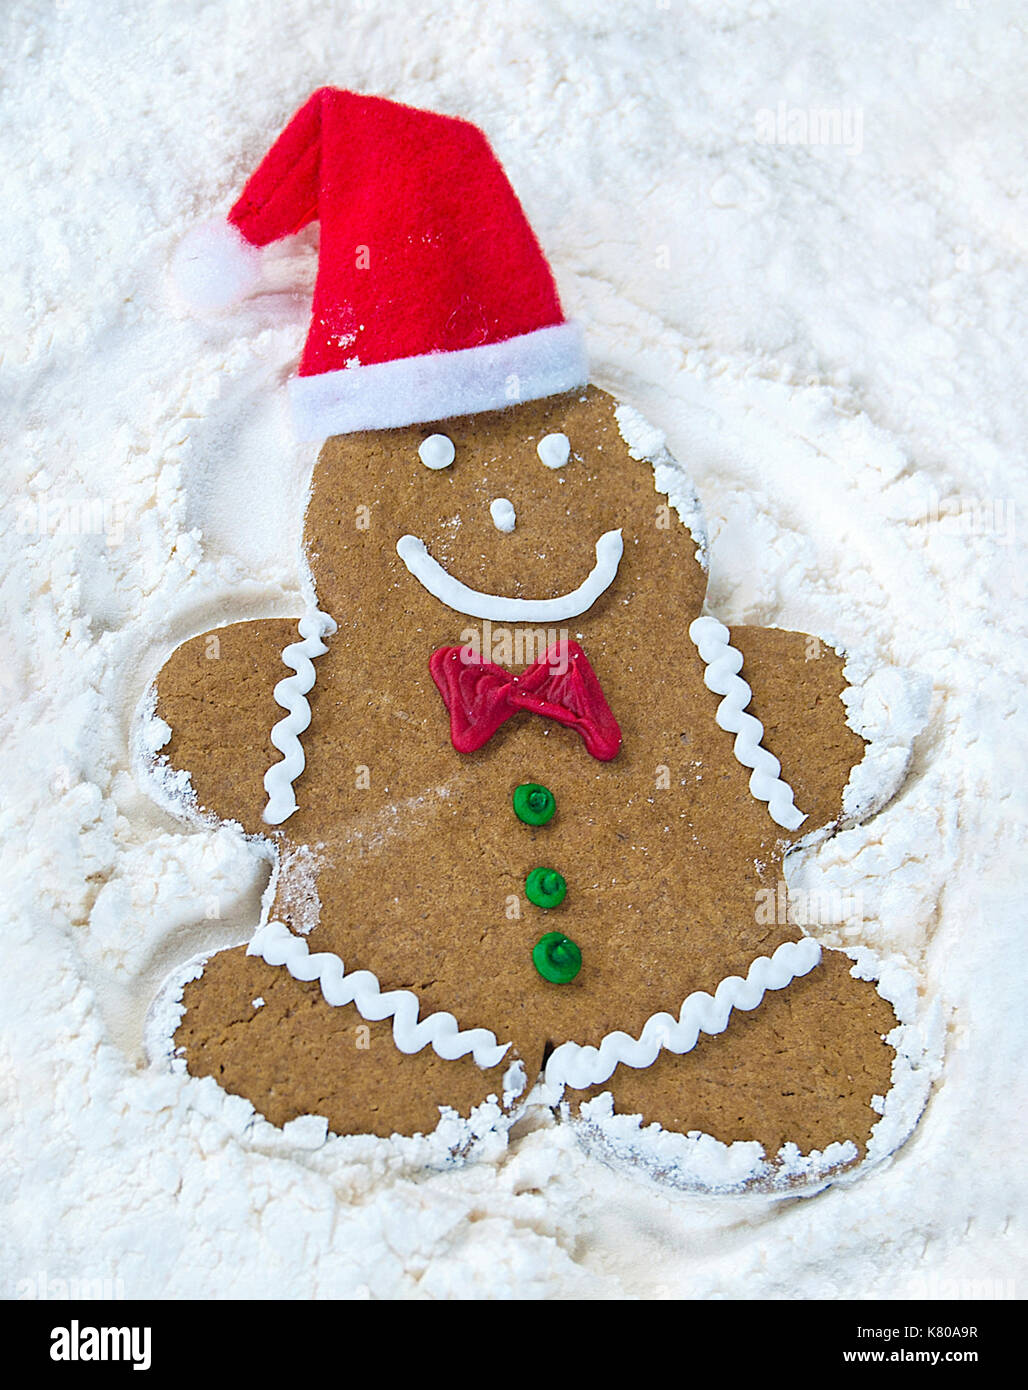 Christmas gingerbread man with hat making snow angel in white flour Stock Photo